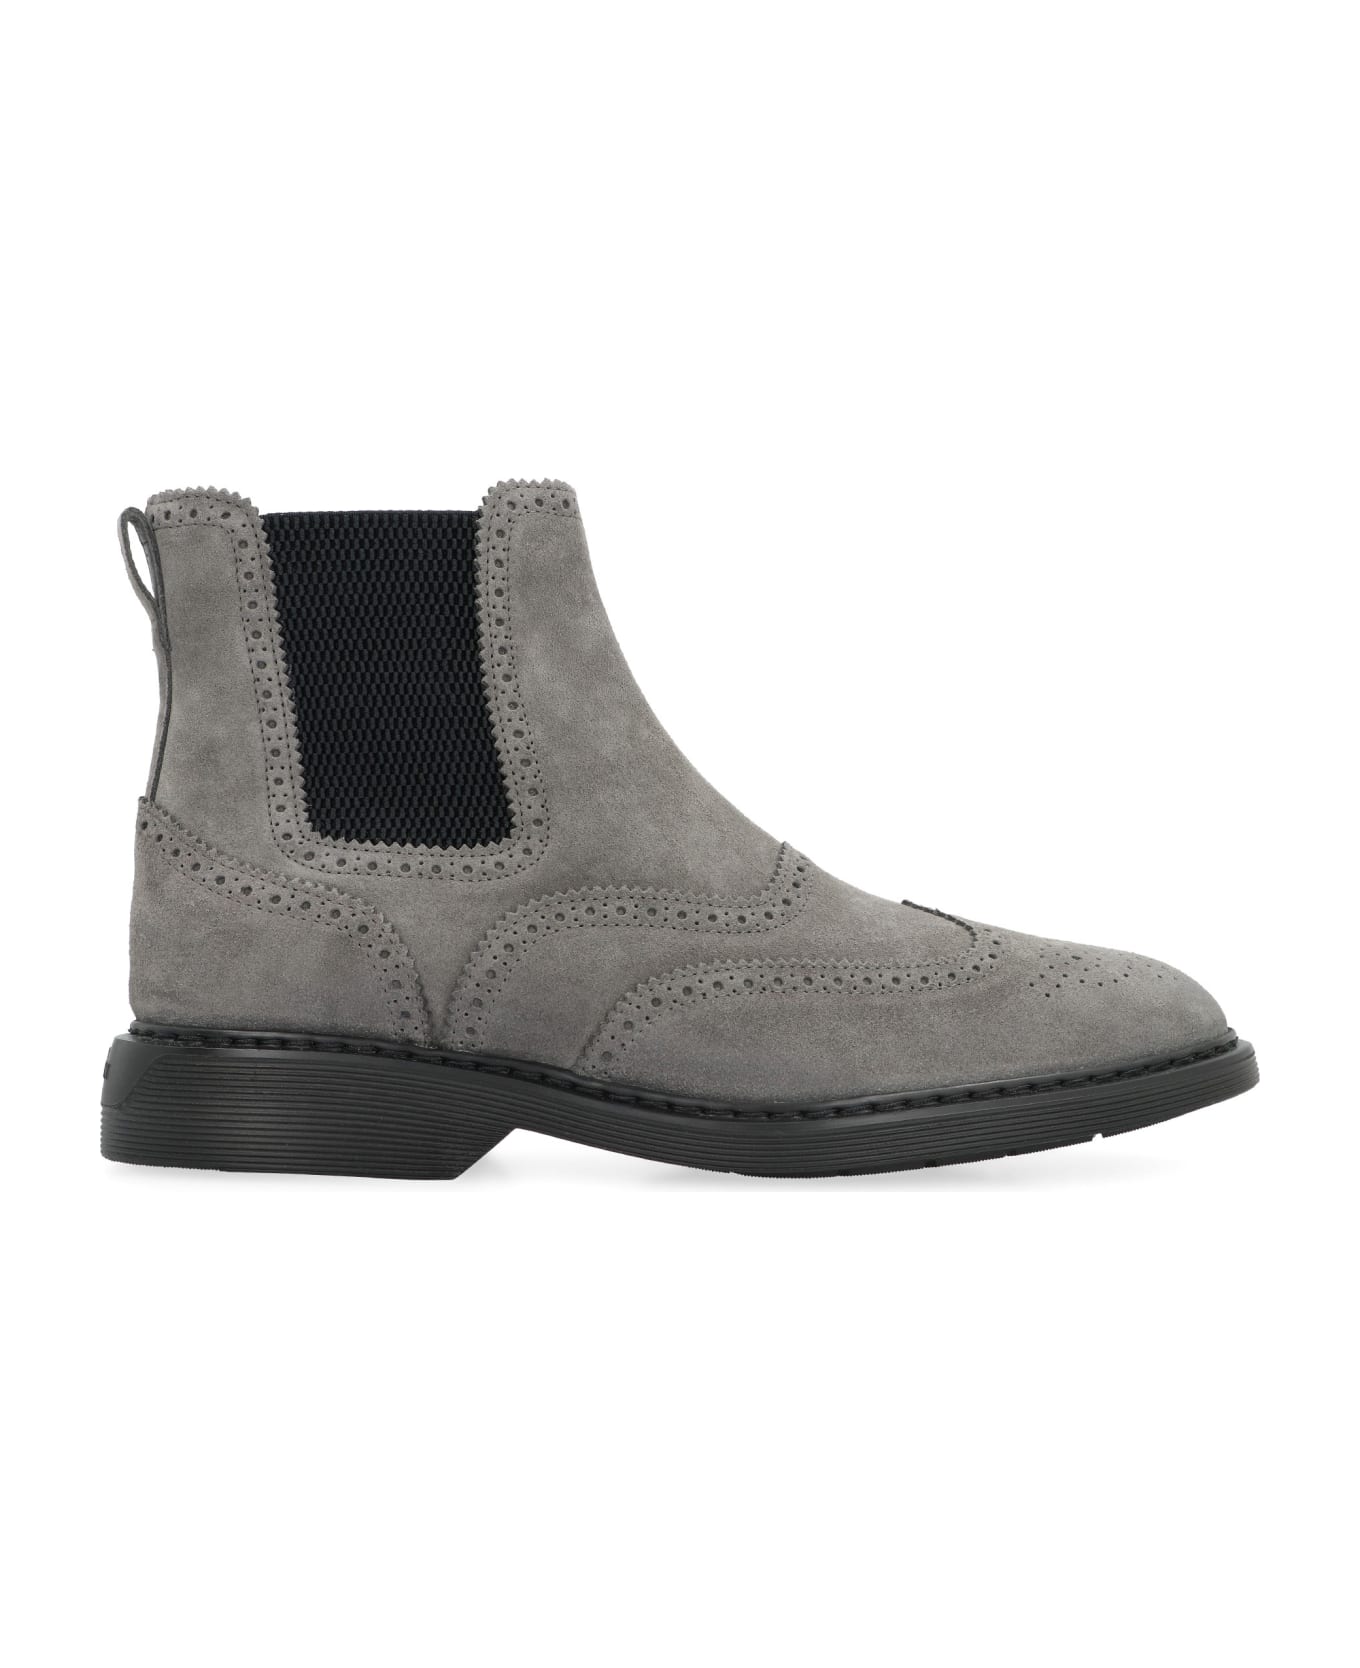 Hogan Leather Ankle Boot - grey